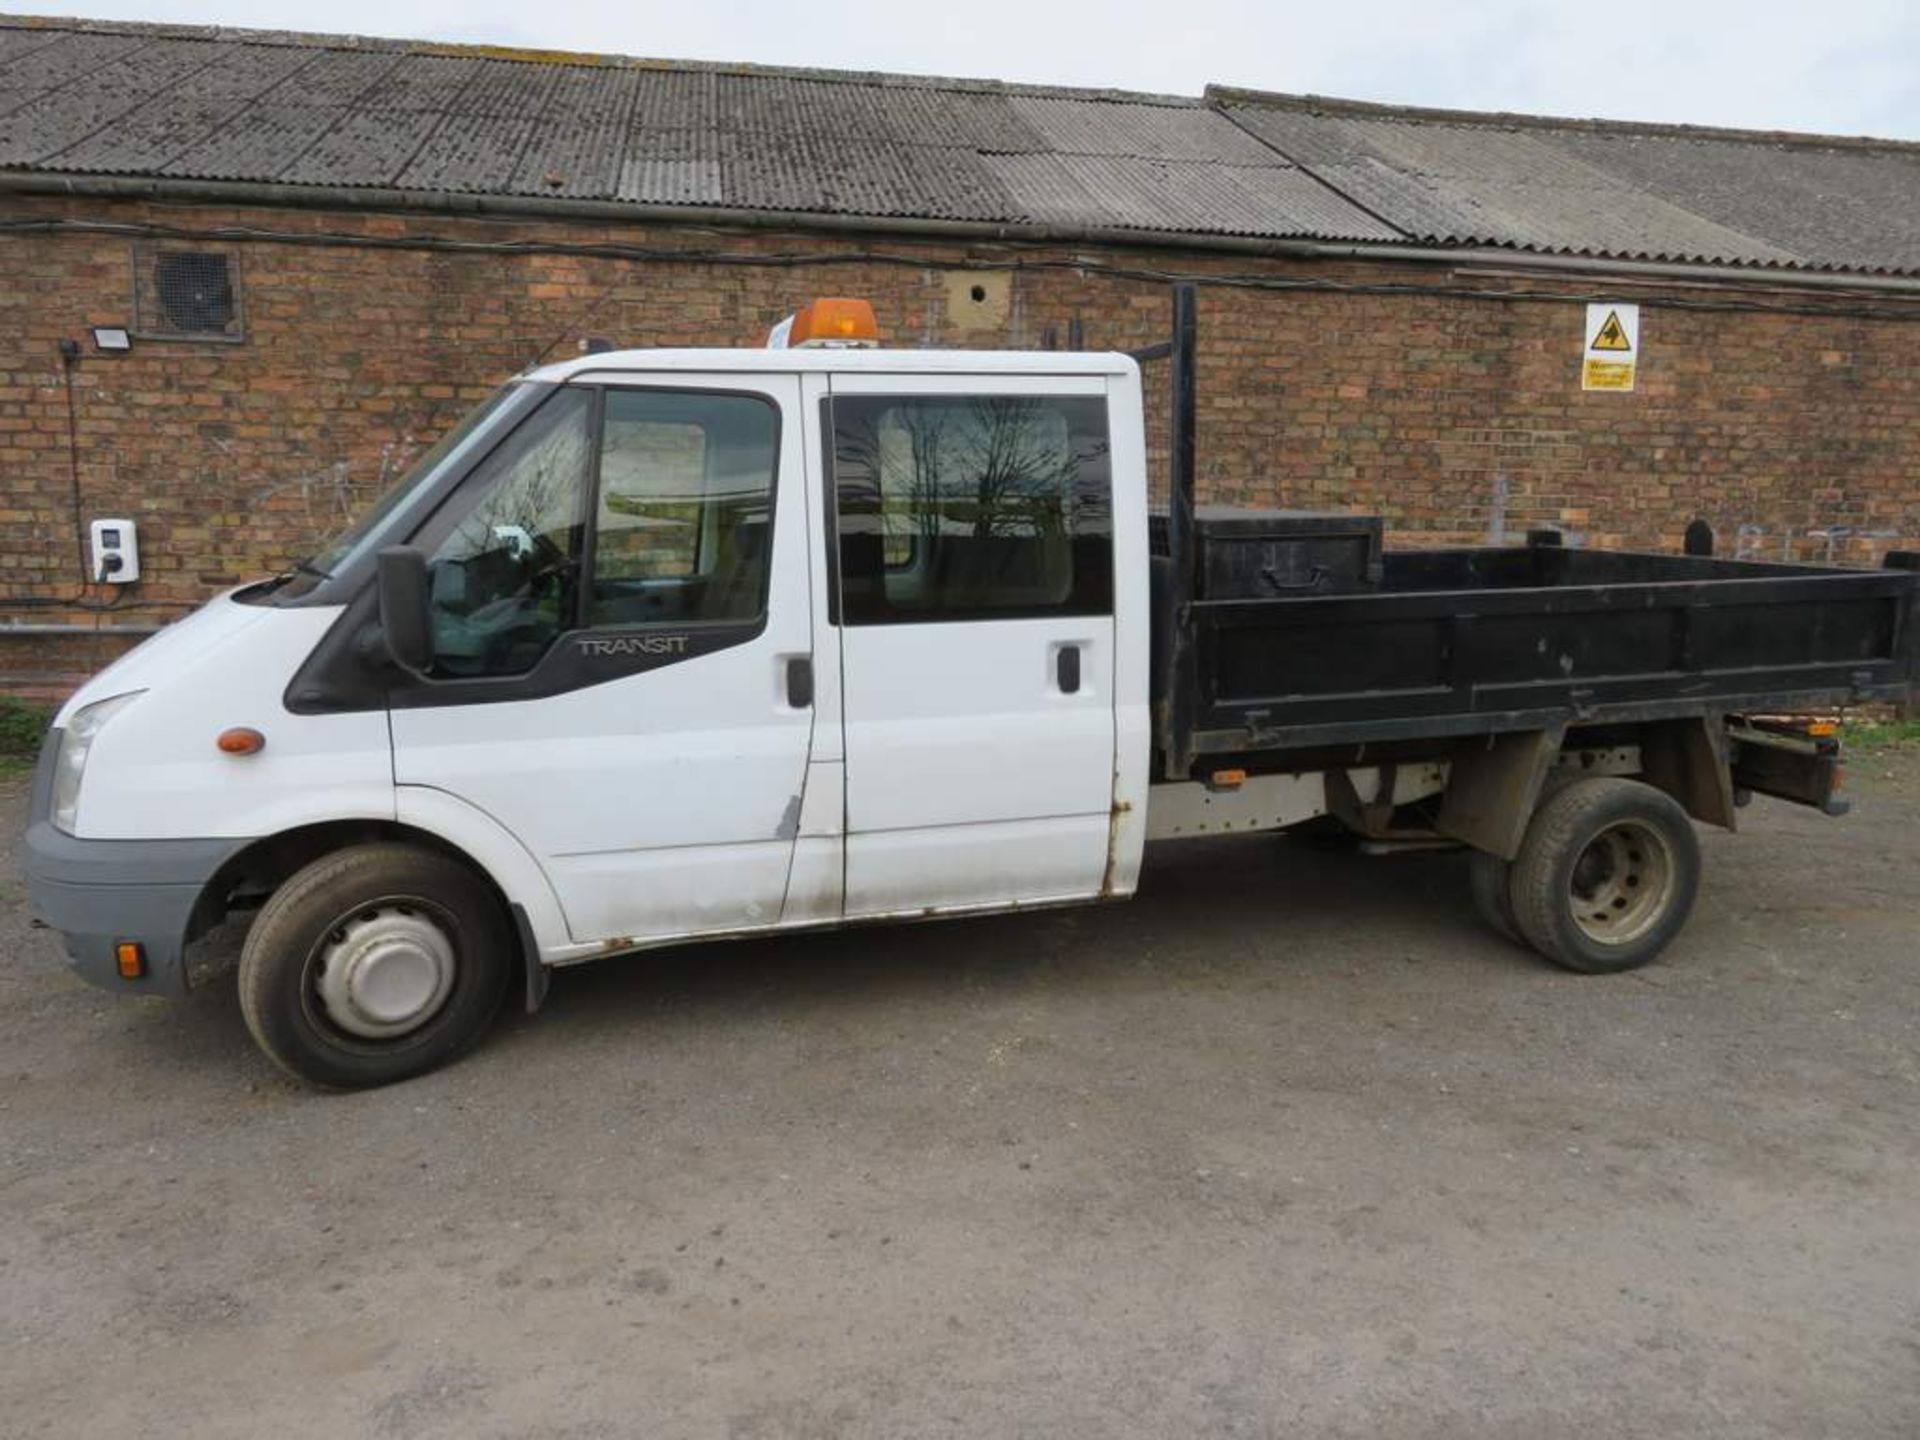 2009 Ford Transit T350L Double Cab Tipper - FX09 YDP - Image 2 of 23